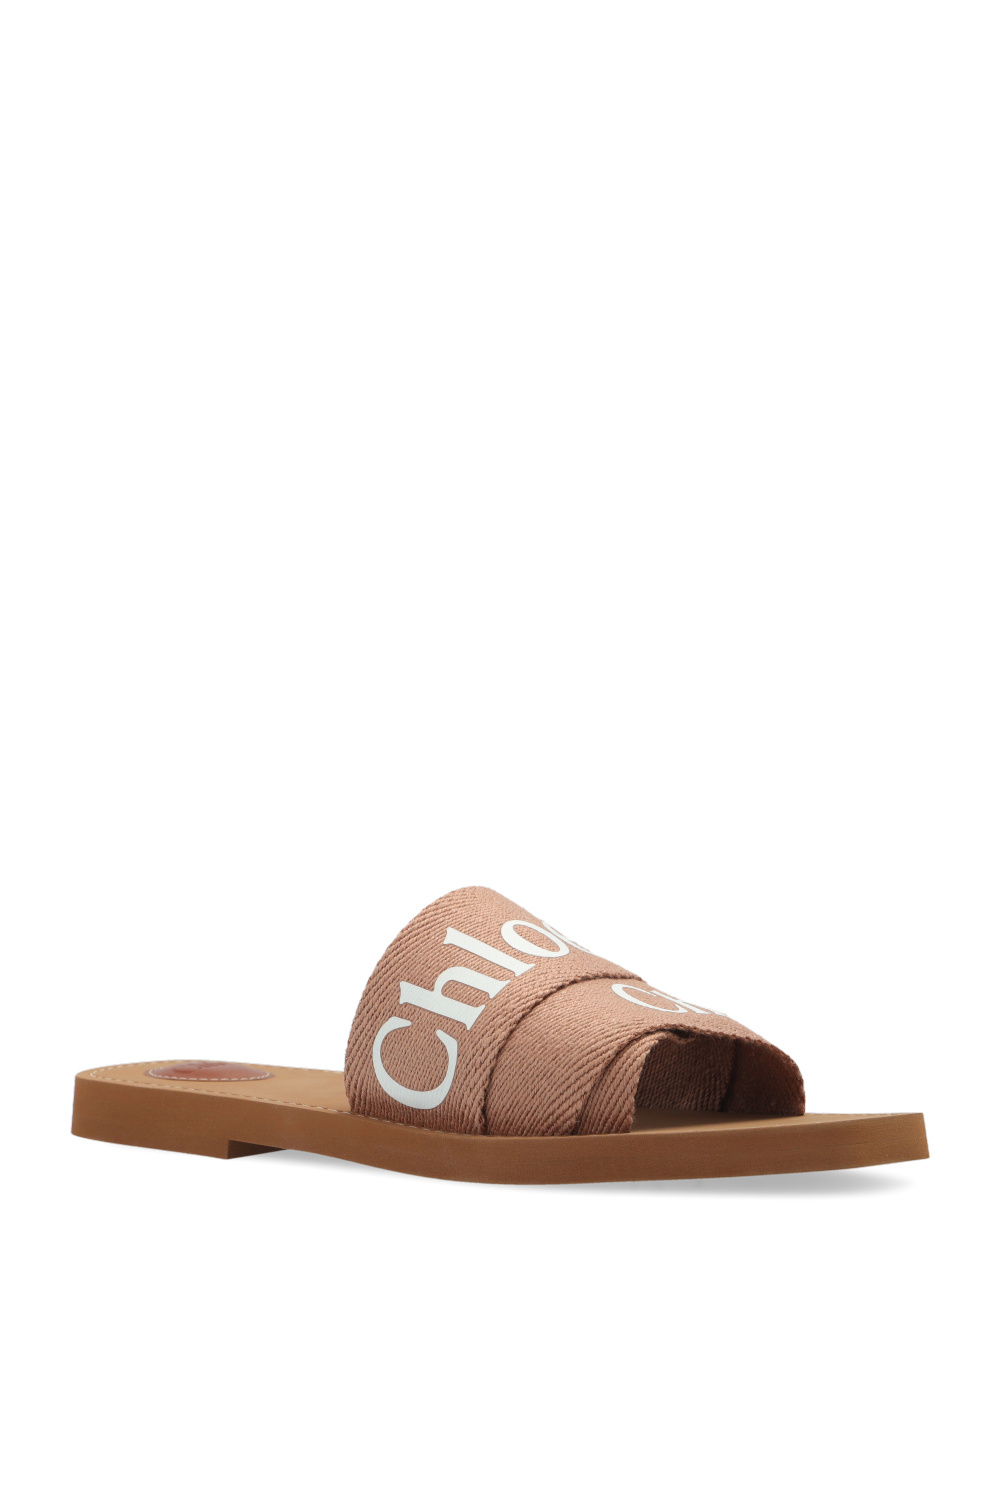 You Can Get Two Pairs of CLN's Cool Marlly Slides for P999